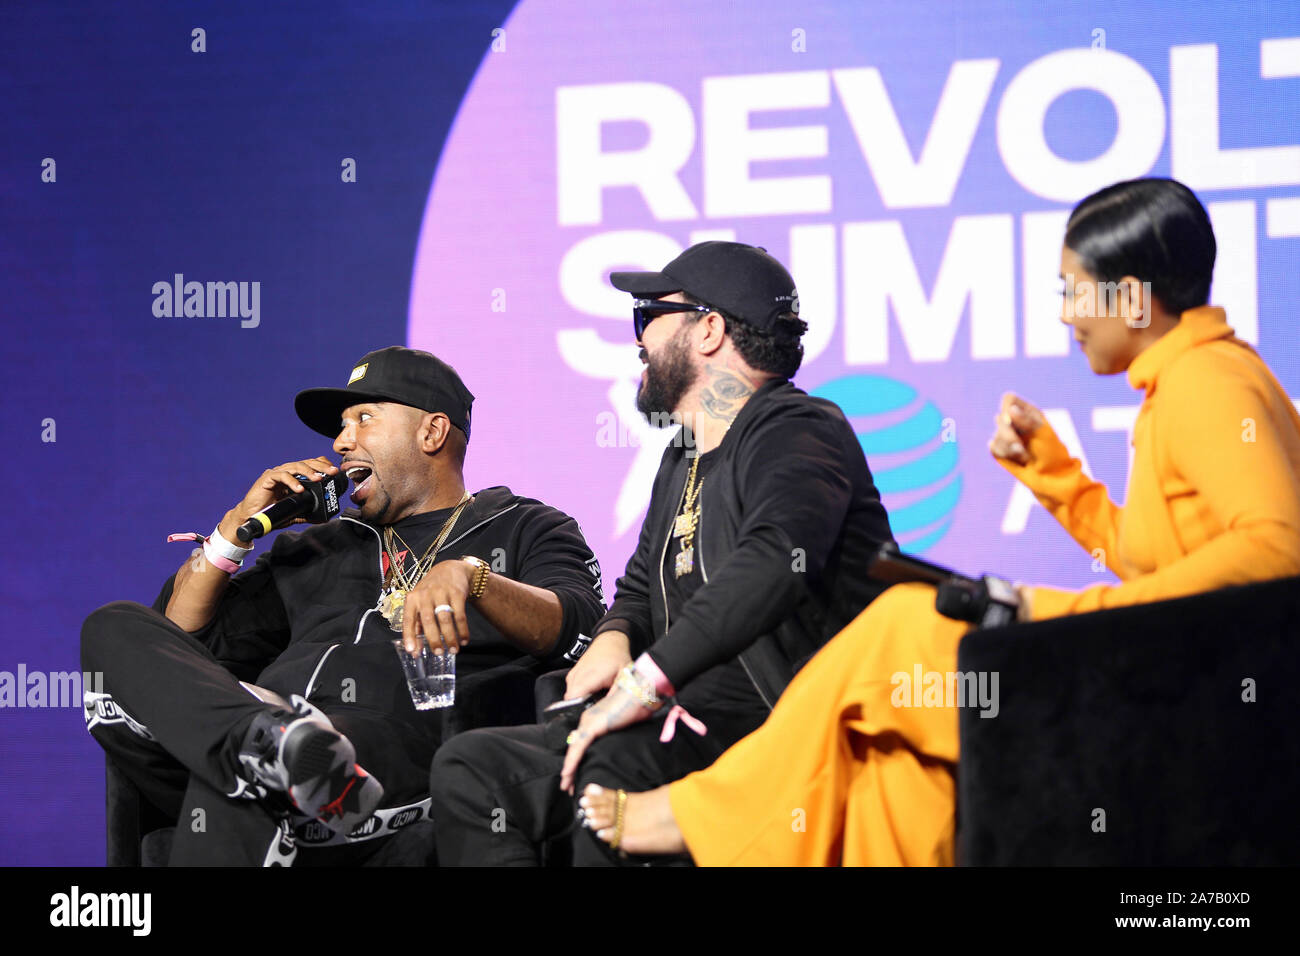 Leading the Latin Culture panel with Abby De La Rosa (r), Carlos 'Spiff TV' Suarez (c) and N.O.R.E. (l) at the Revolt Summit x AT&T LA on October 25, 2019 at Magic Box in Los Angeles, California. Stock Photo